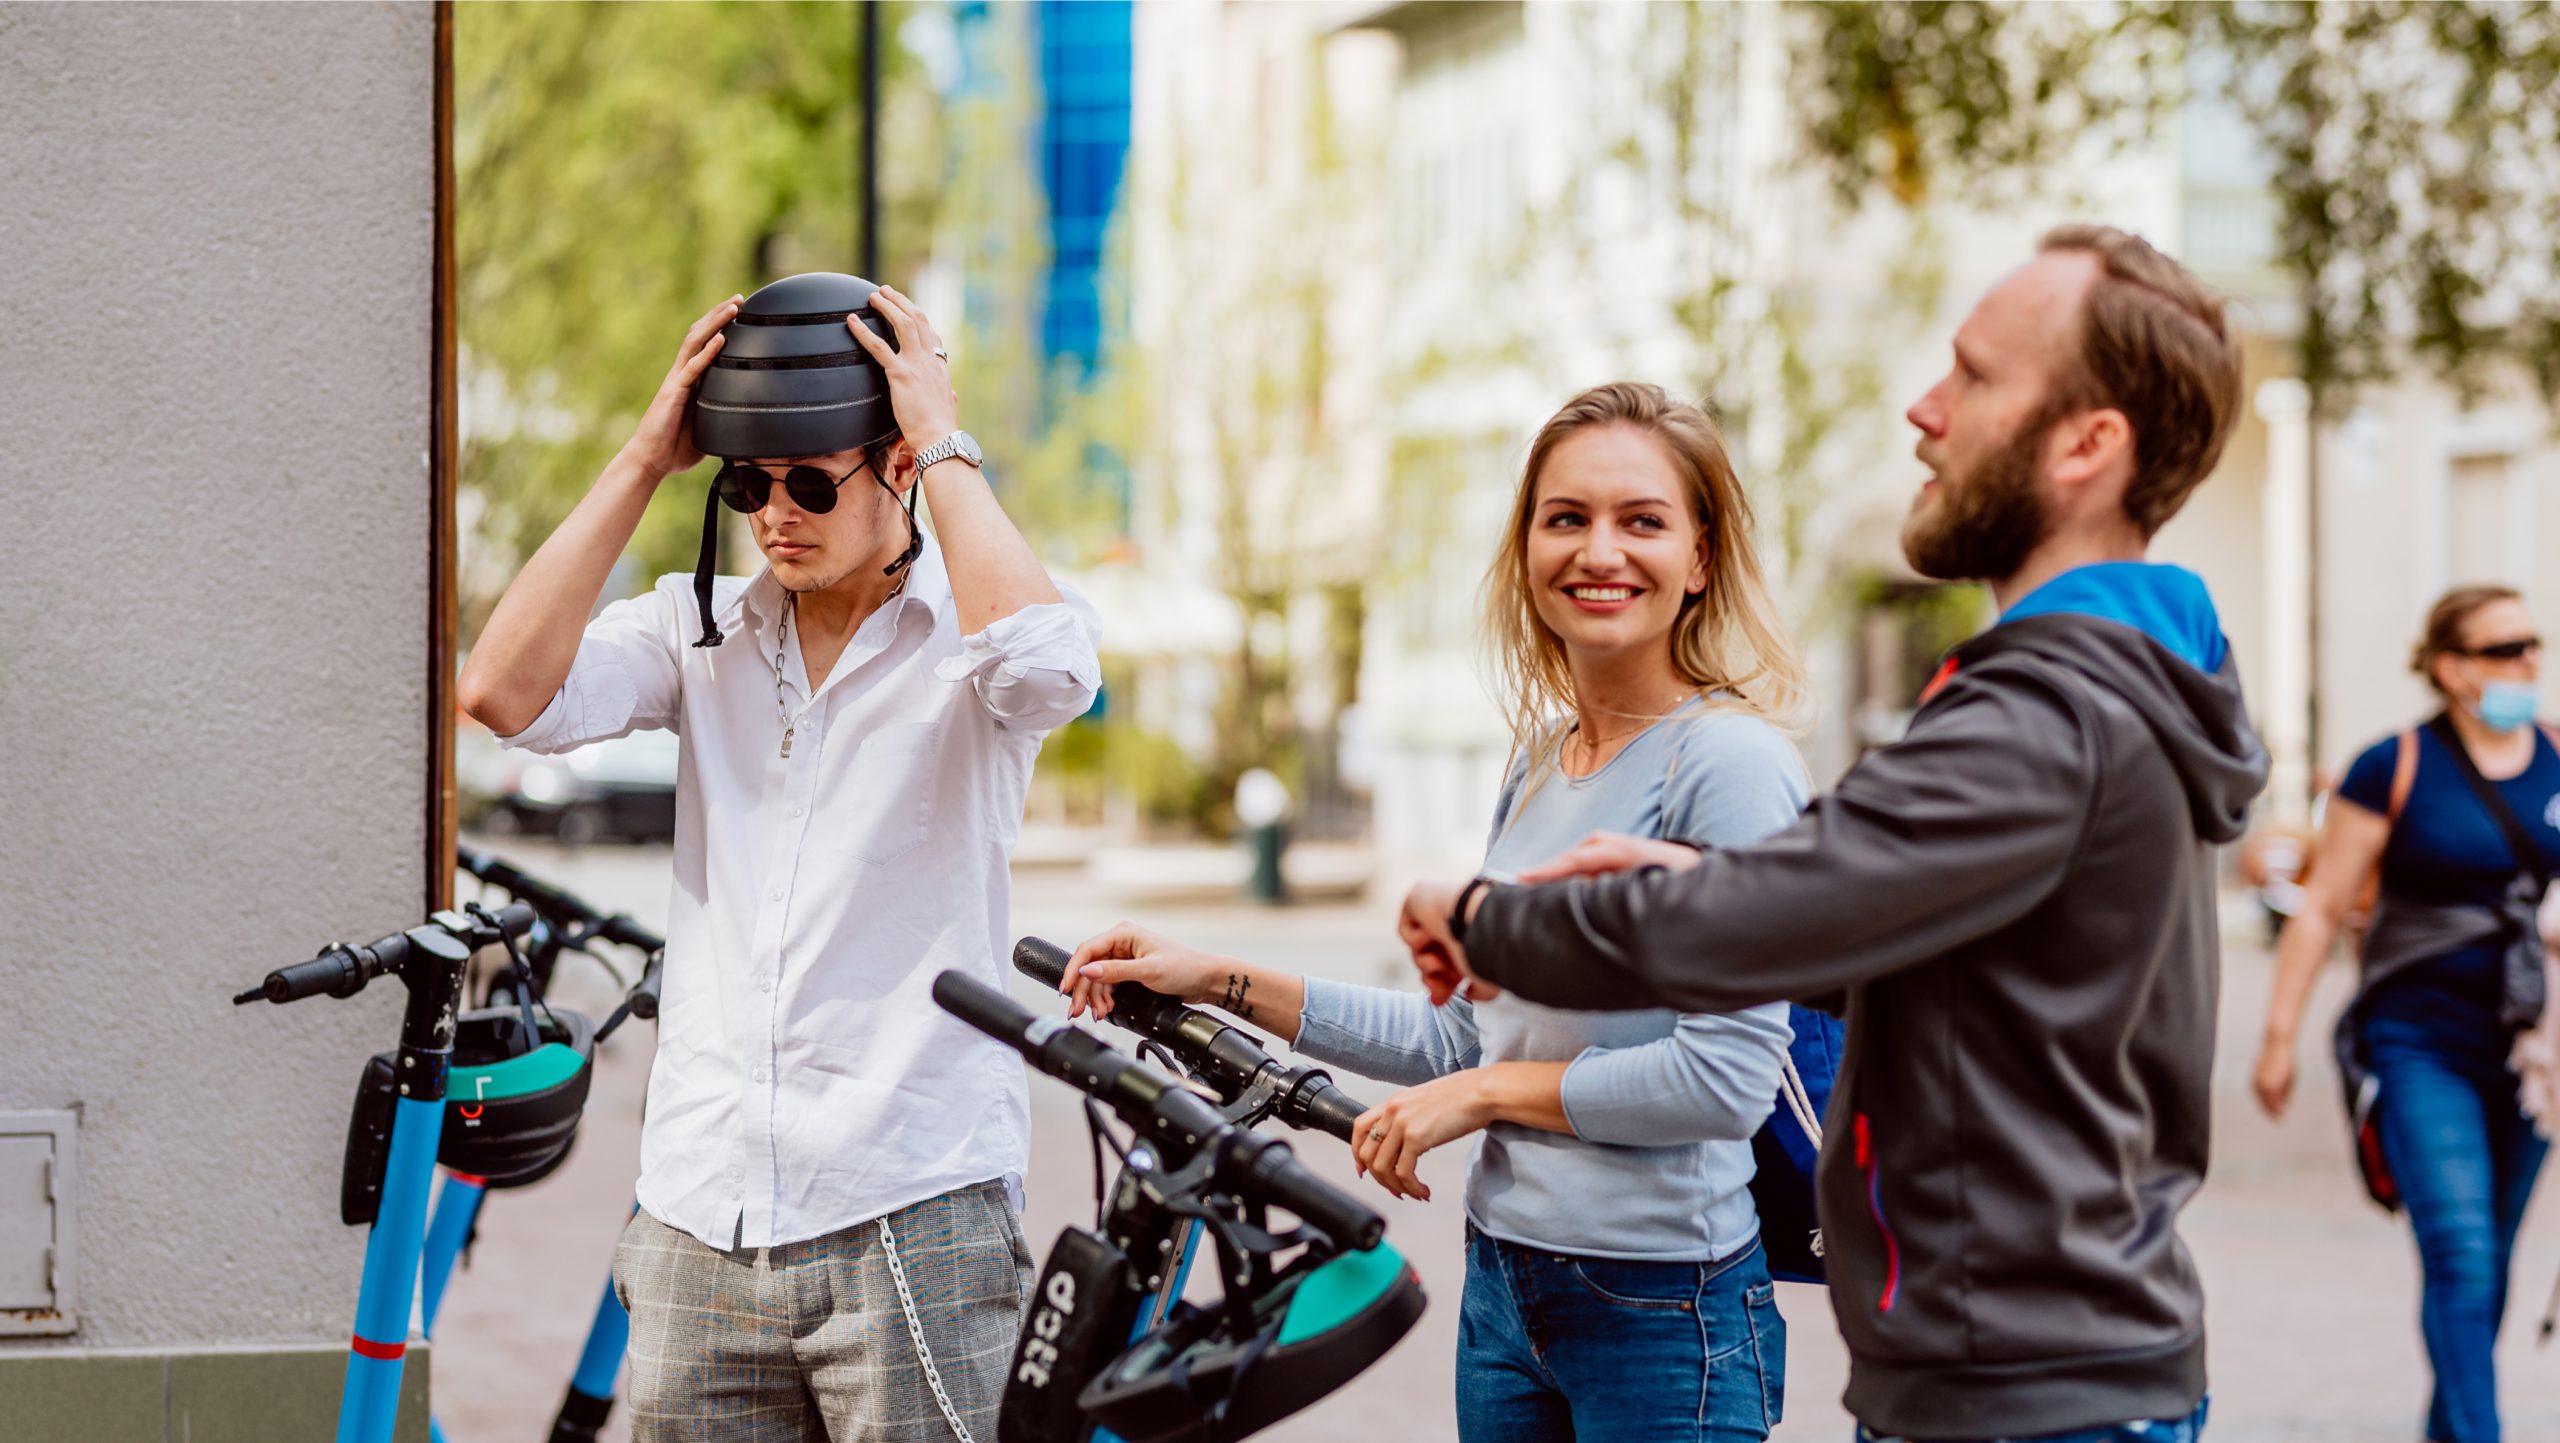 A group of three people laughing and putting their helmets on to get ready to ride Dott e-scooters.